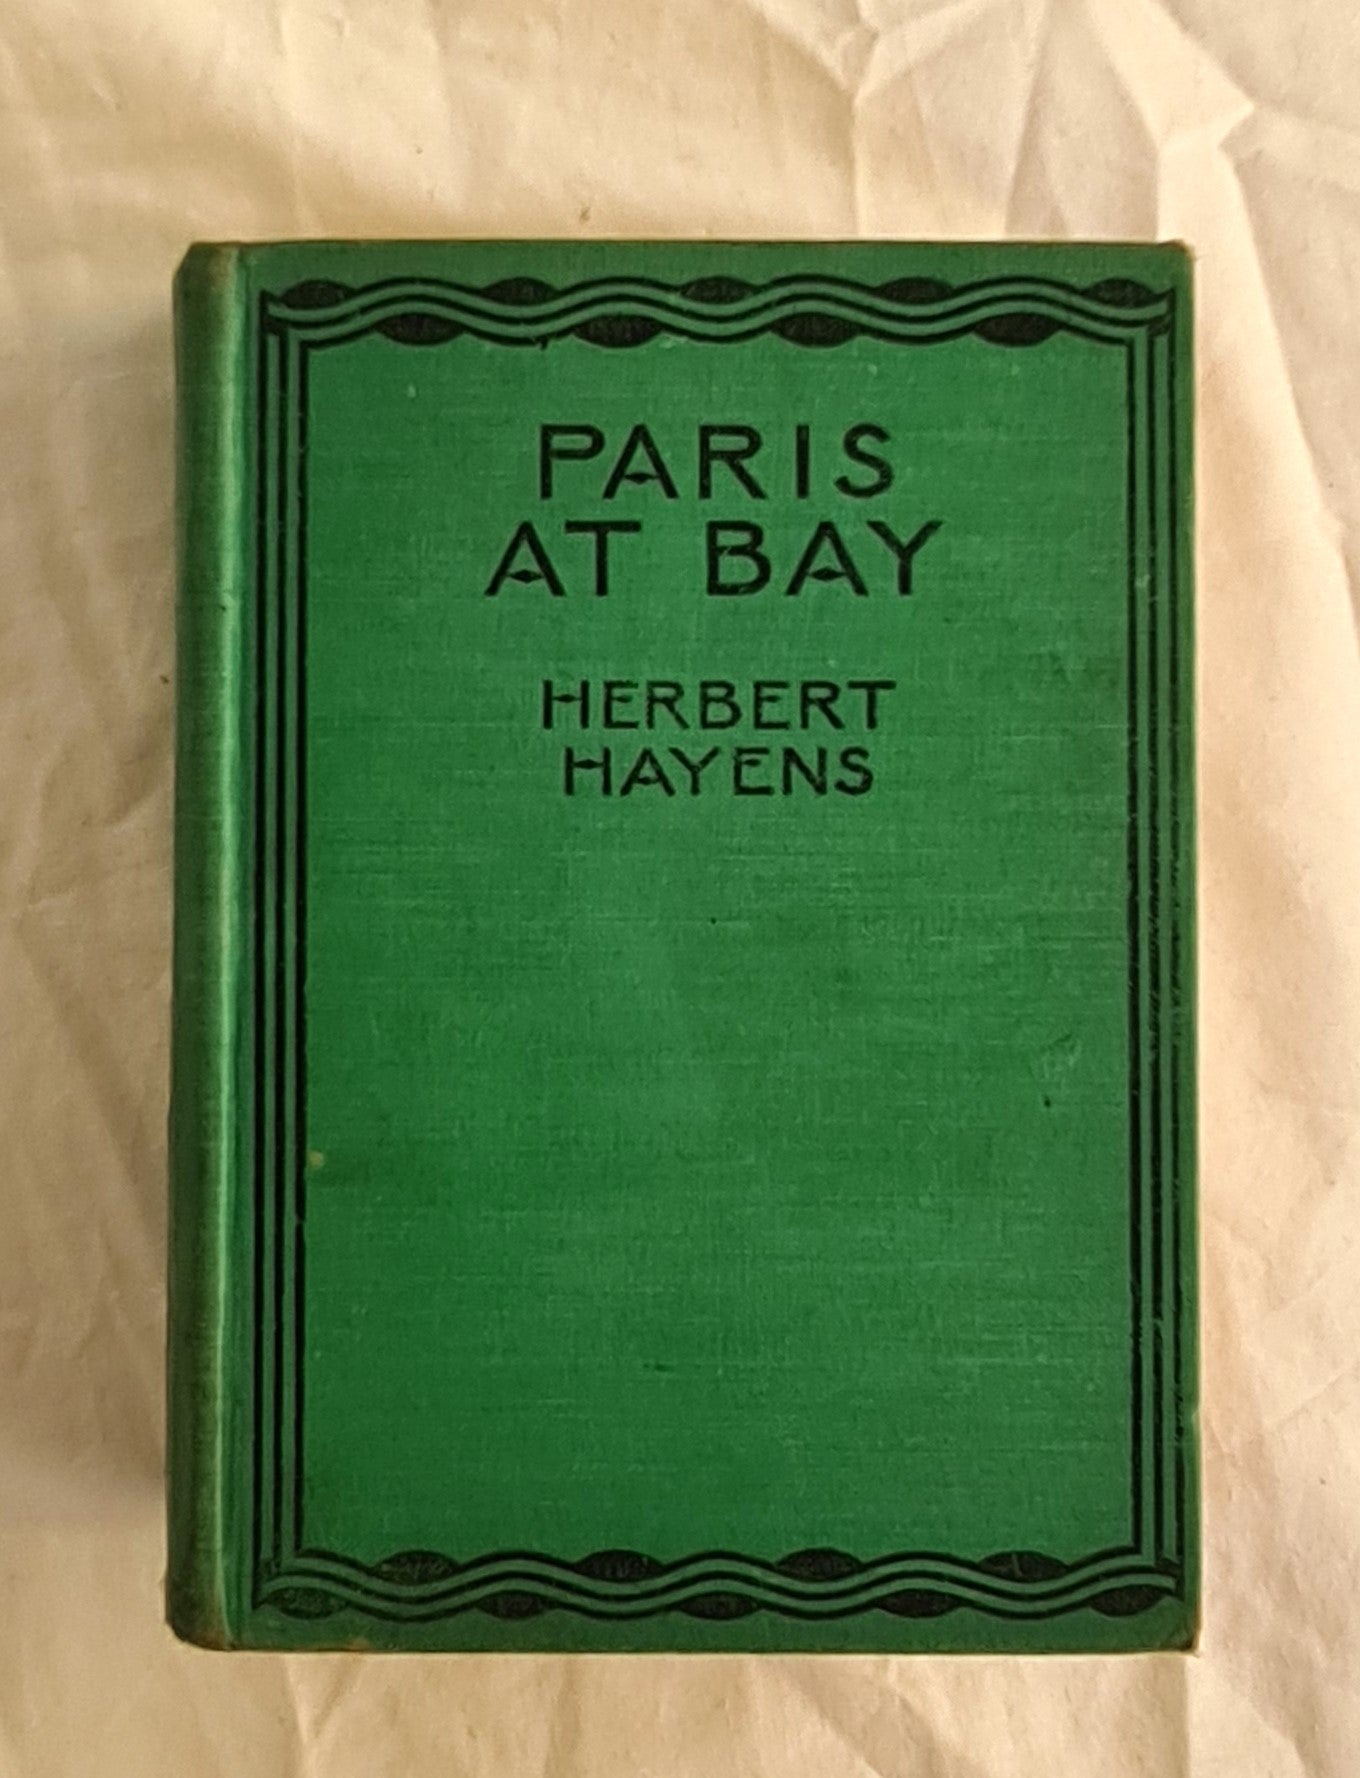 Paris at Bay  A Story of the Siege and the Commune  by Herbert Hayens